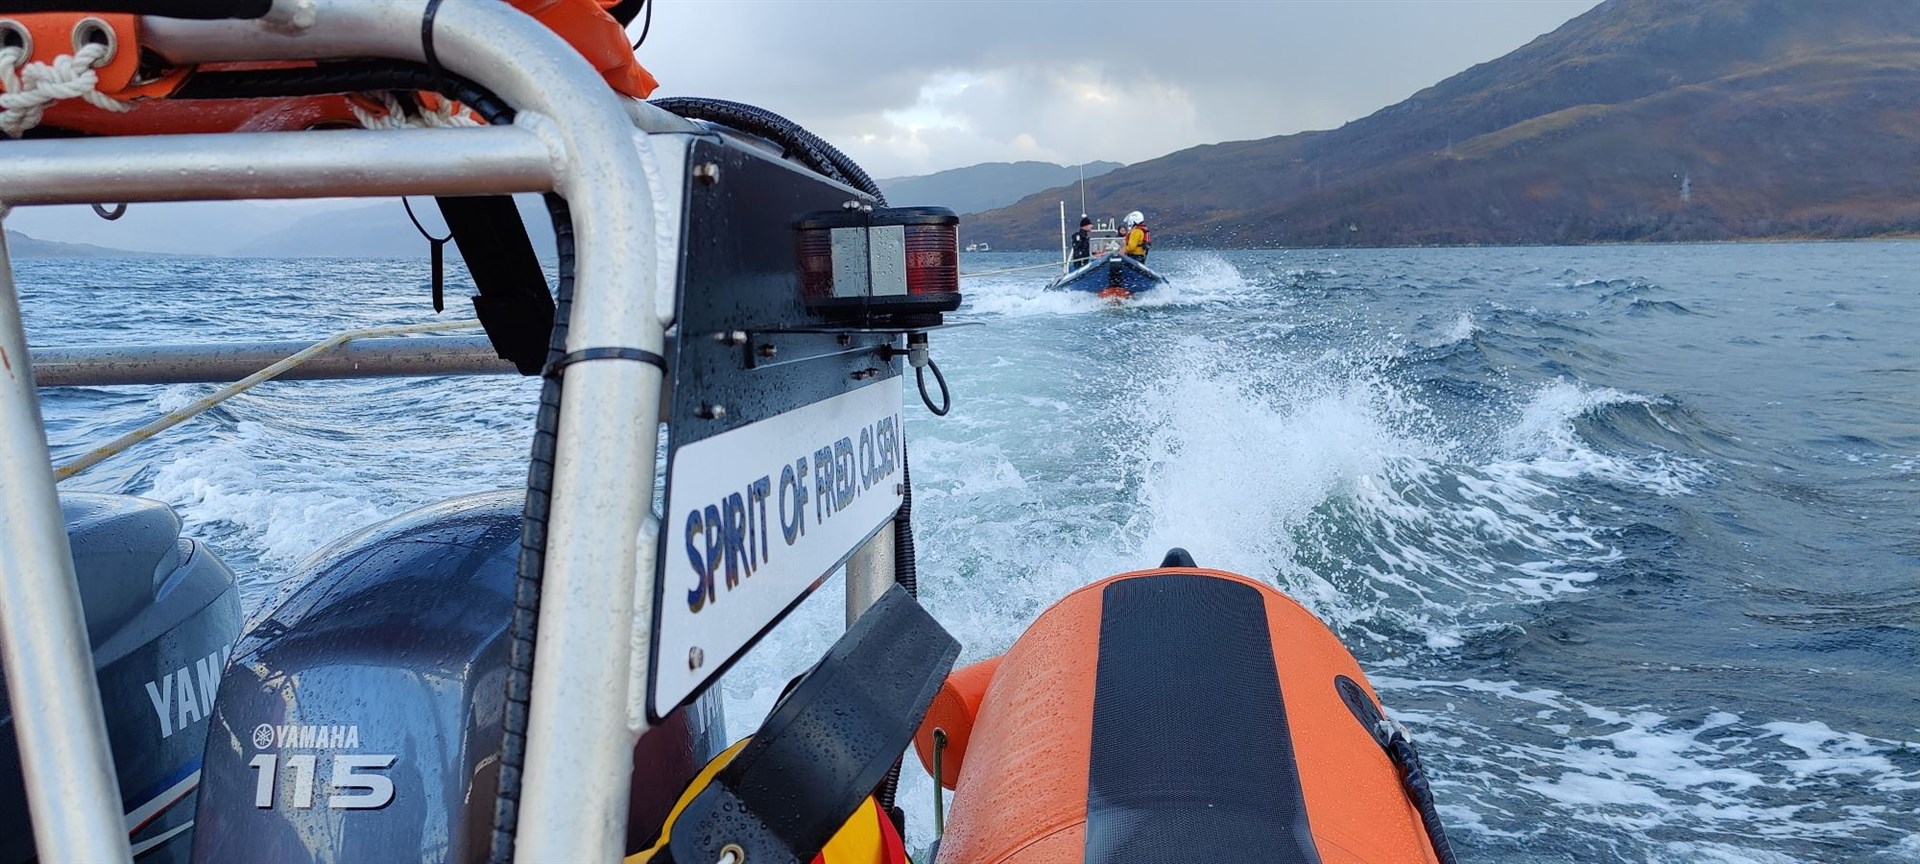 Dive boat under tow. Picture: Kyle RNLI